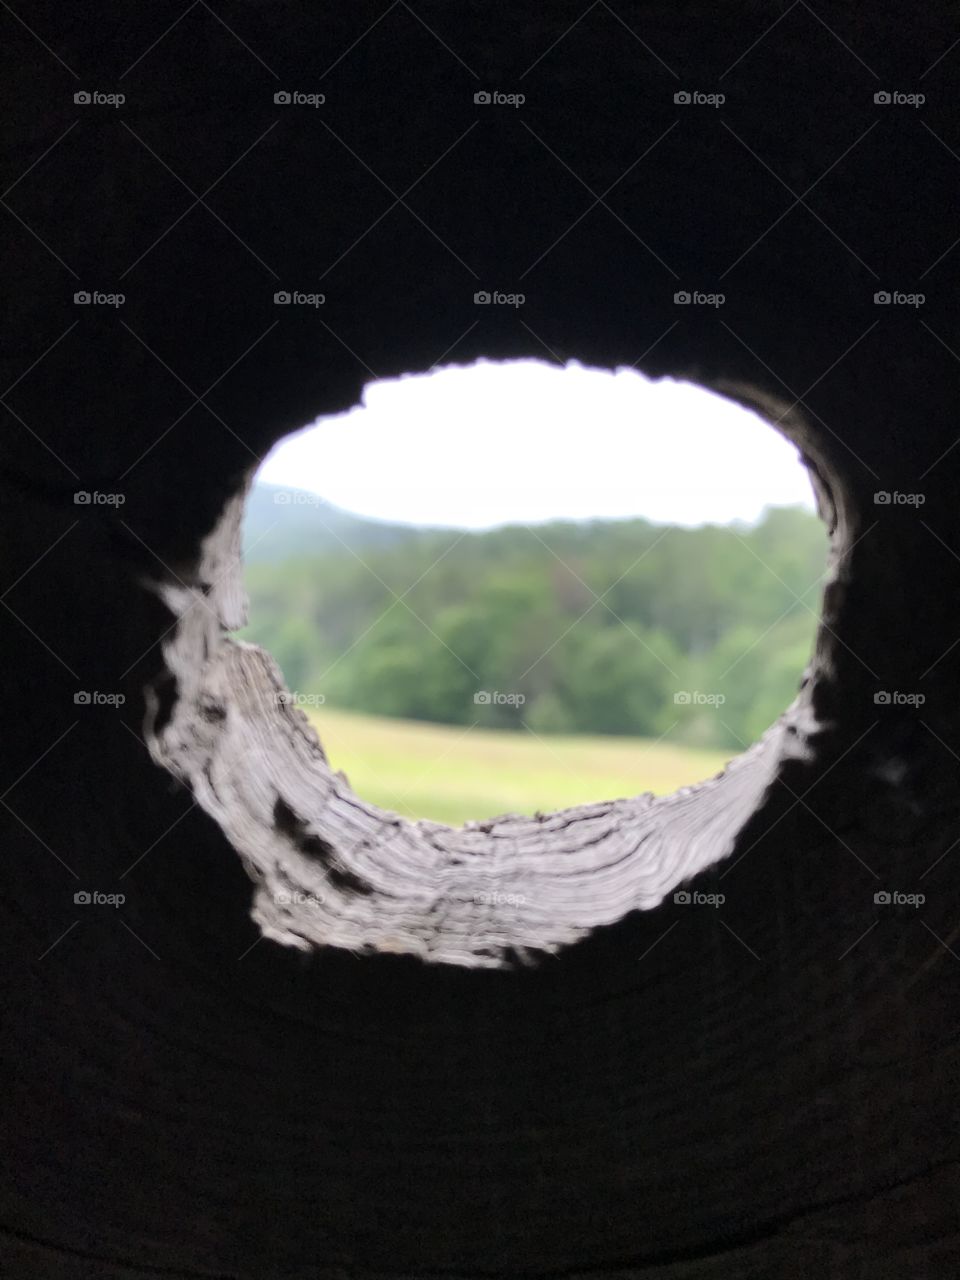 Looking through a knot hole in a rustic old barn